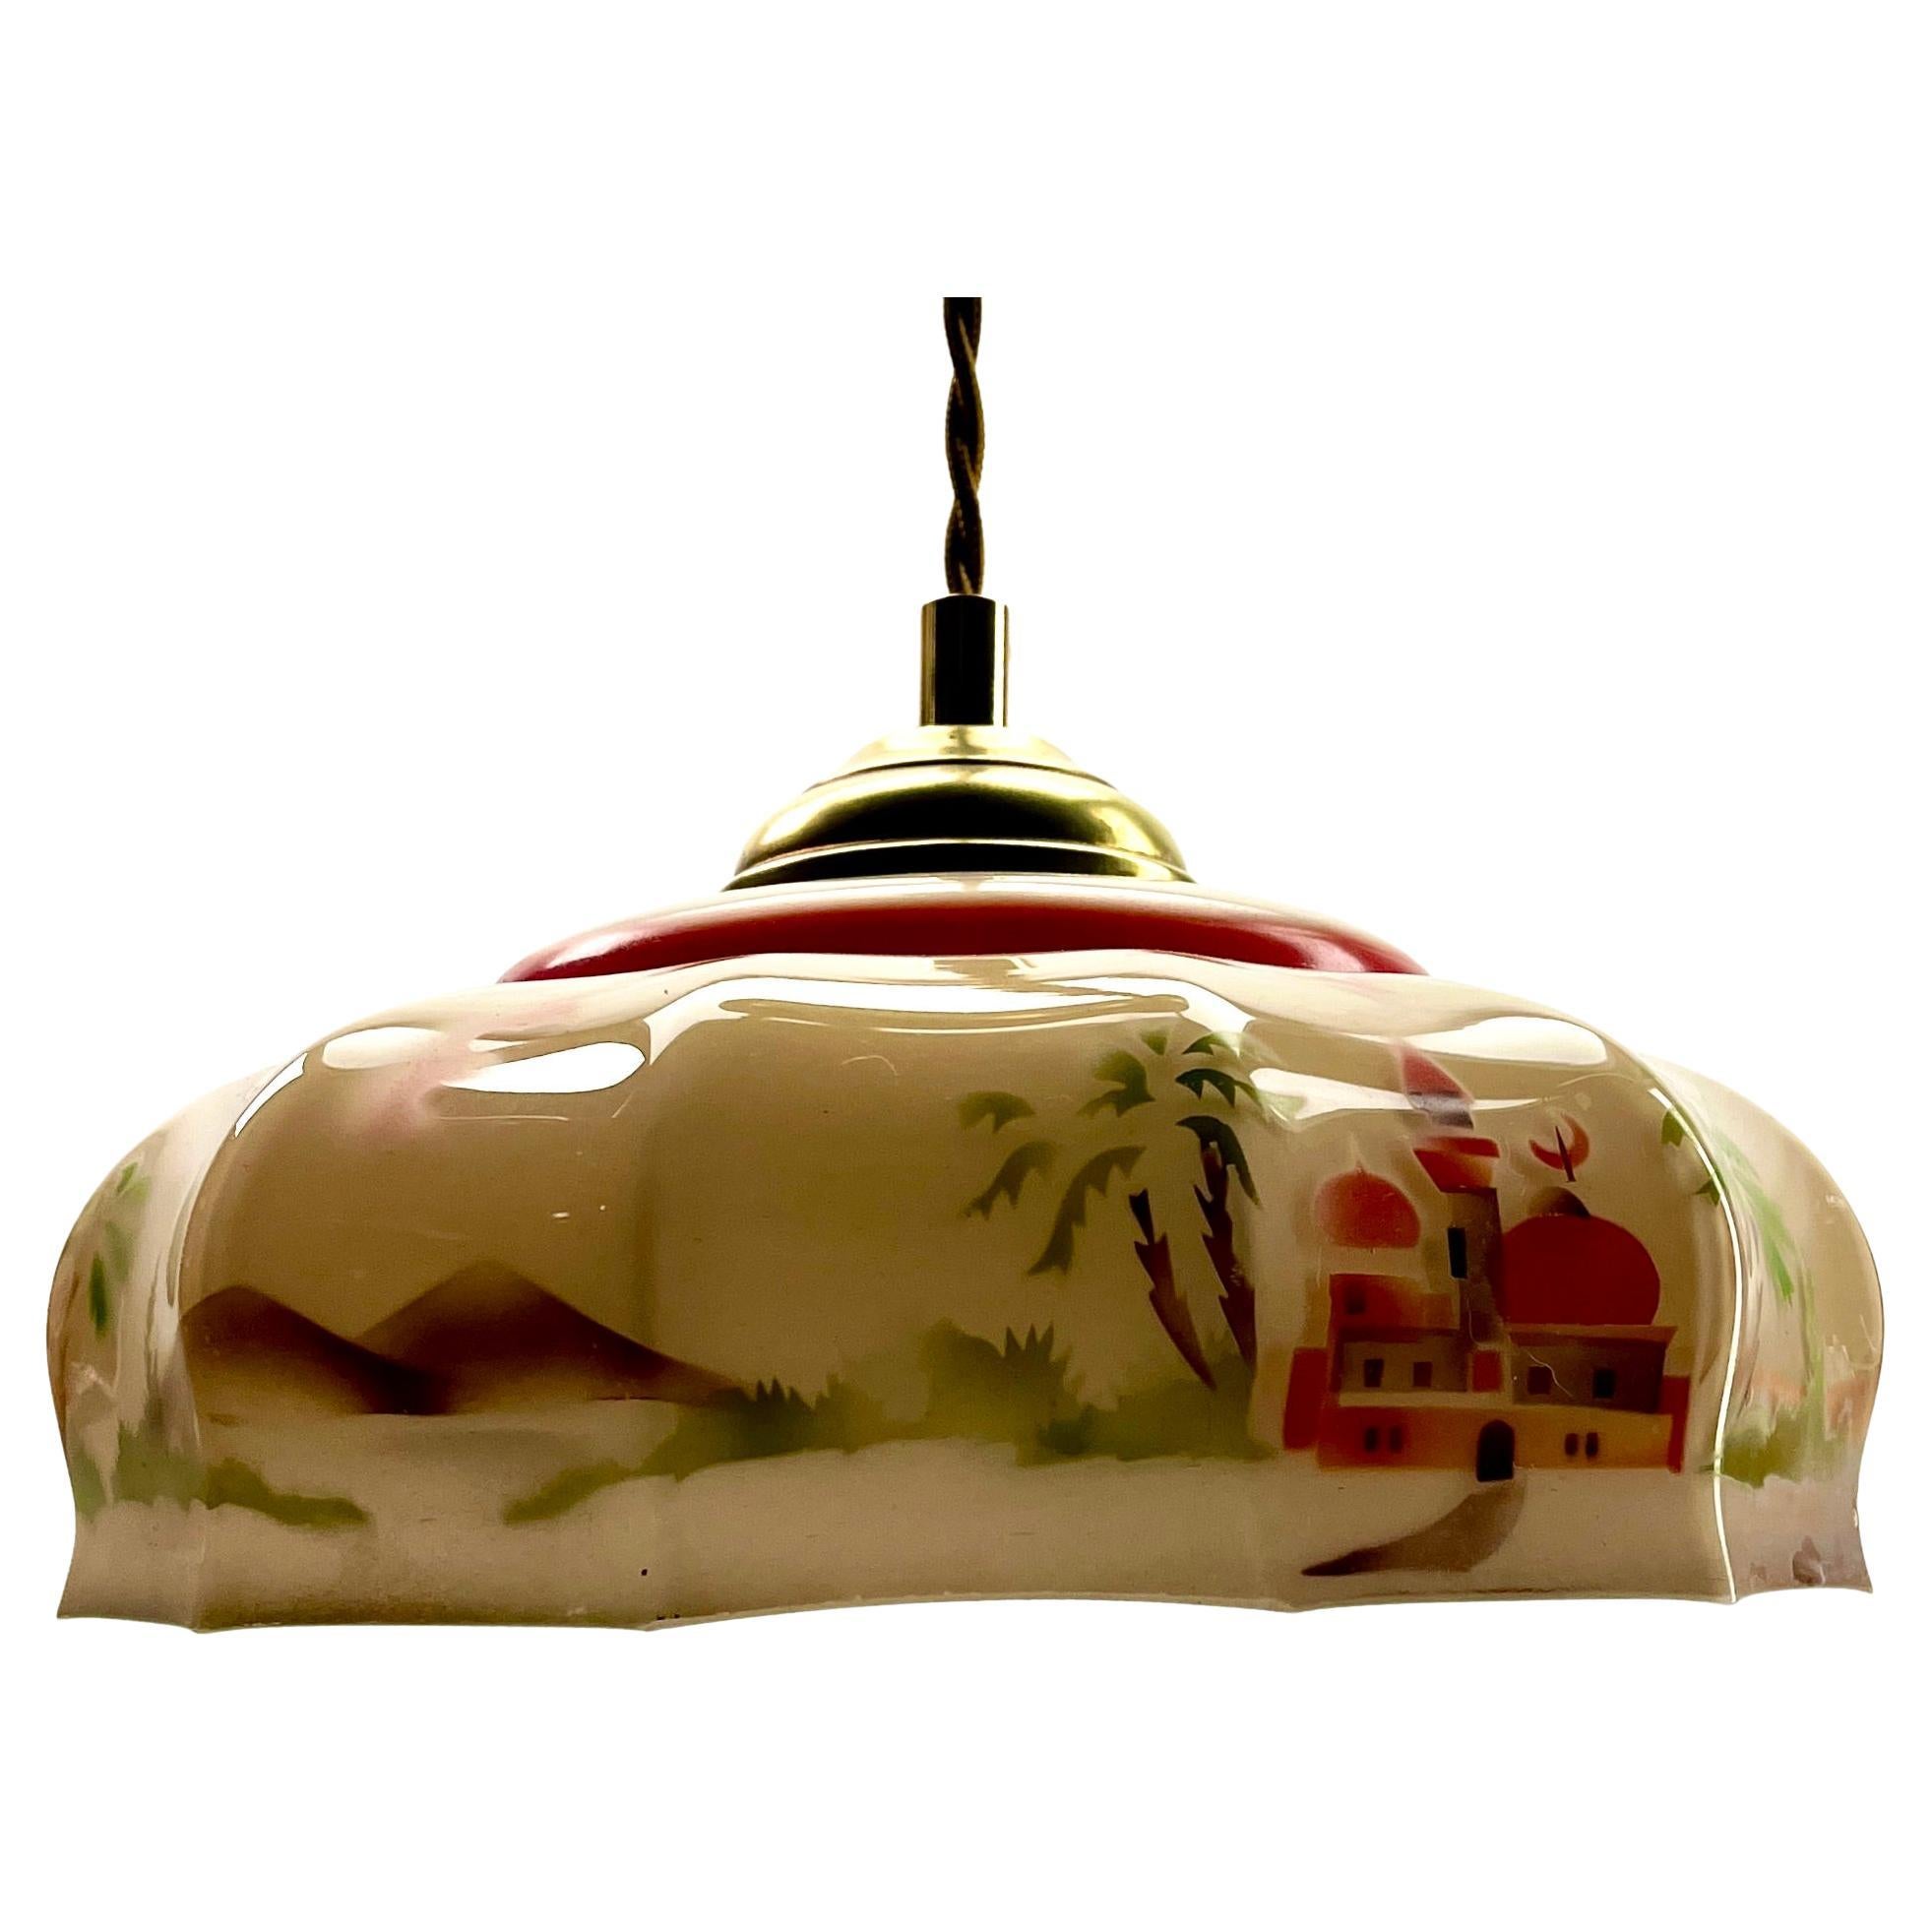 Art Nouveau ceiling lamp.
Photography fails to capture the simple elegant illumination provided by this lamp.

Fitting messing pendant ceiling light with fixing to hold a stylish Belgian Art Deco lampshade. 
Good distribution of darker and lighter